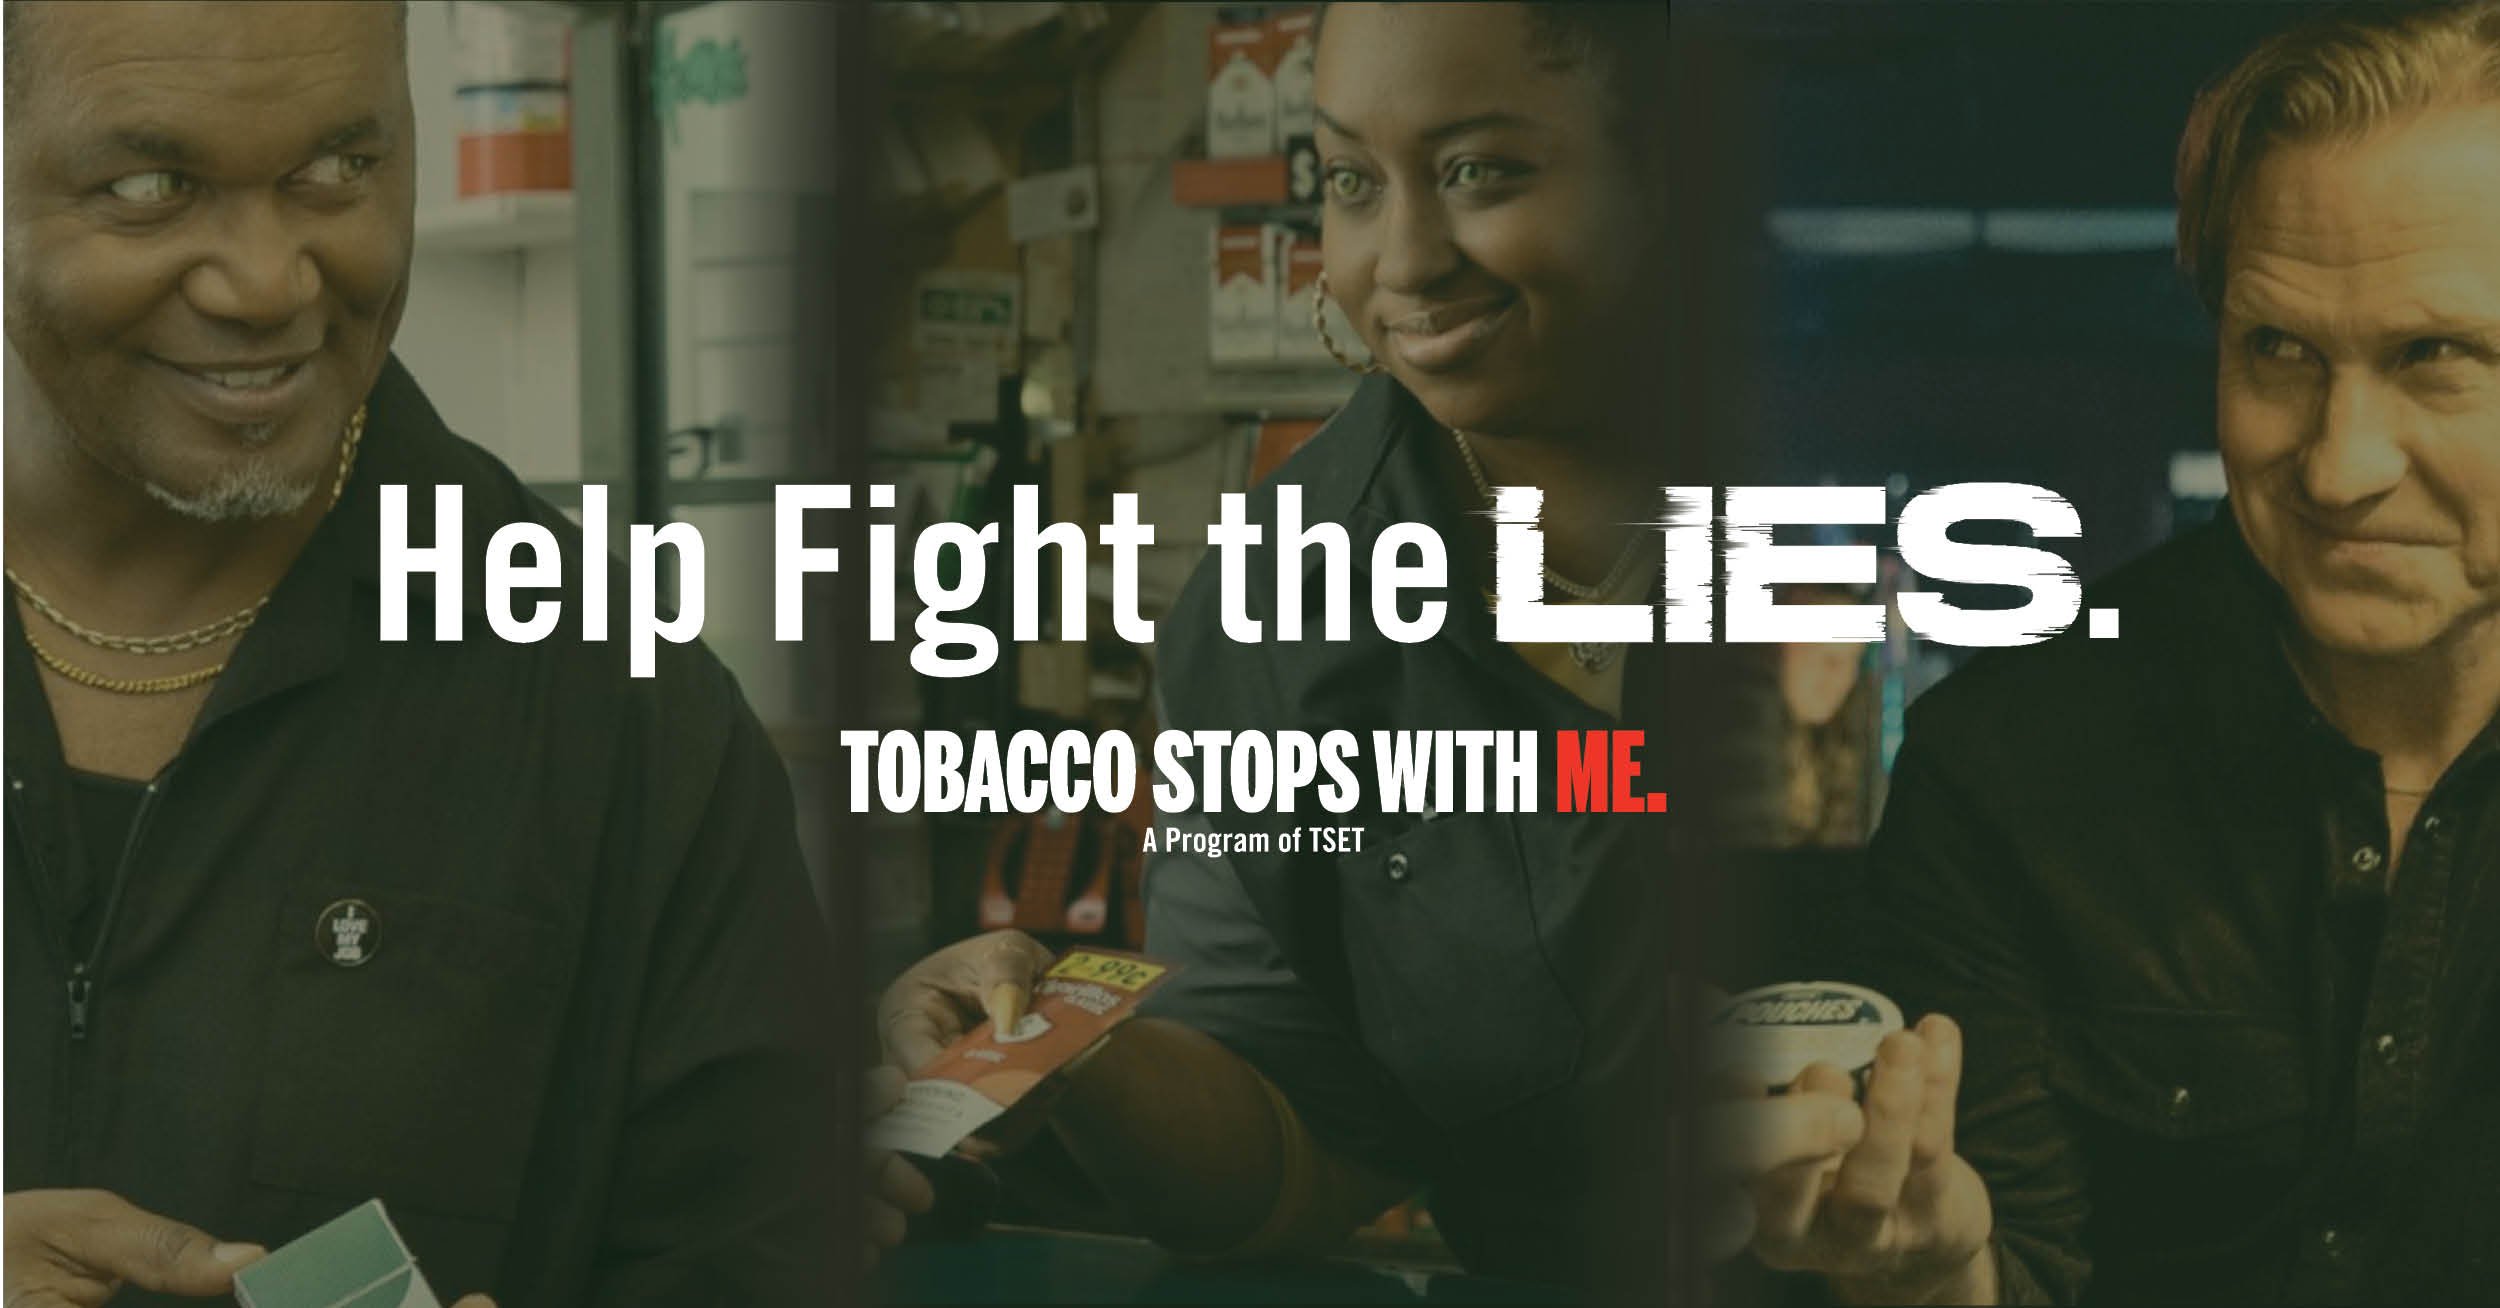 Help Fight the Lies. Tobacco Stops With Me. A program of TSET.